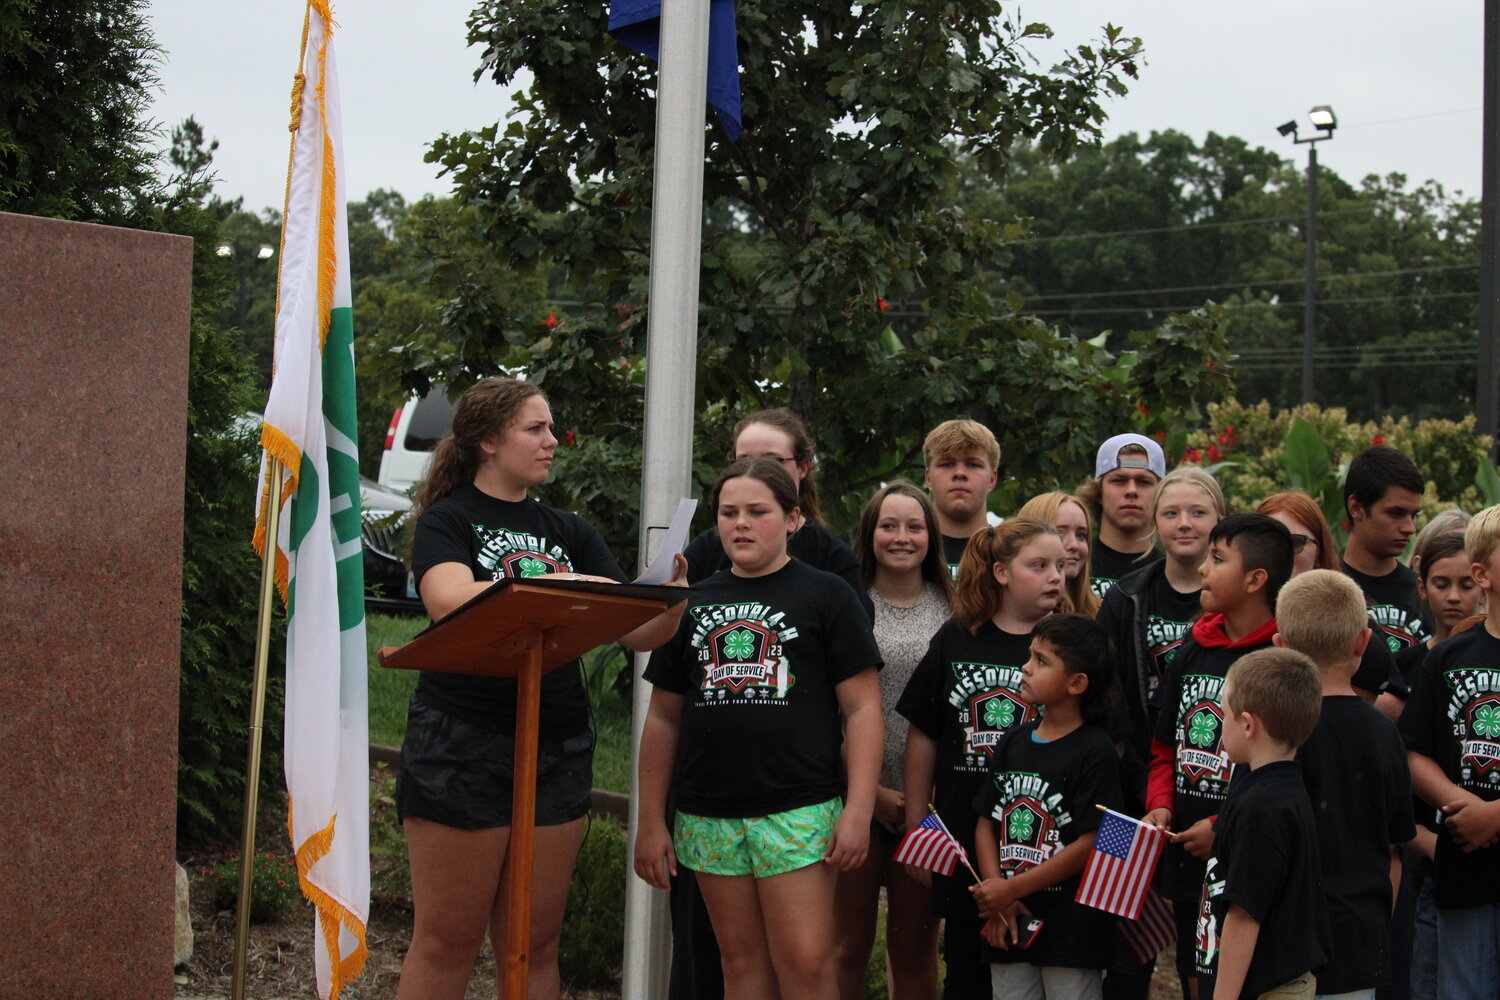 Several members of Warren County 4-H groups attended the ceremony.